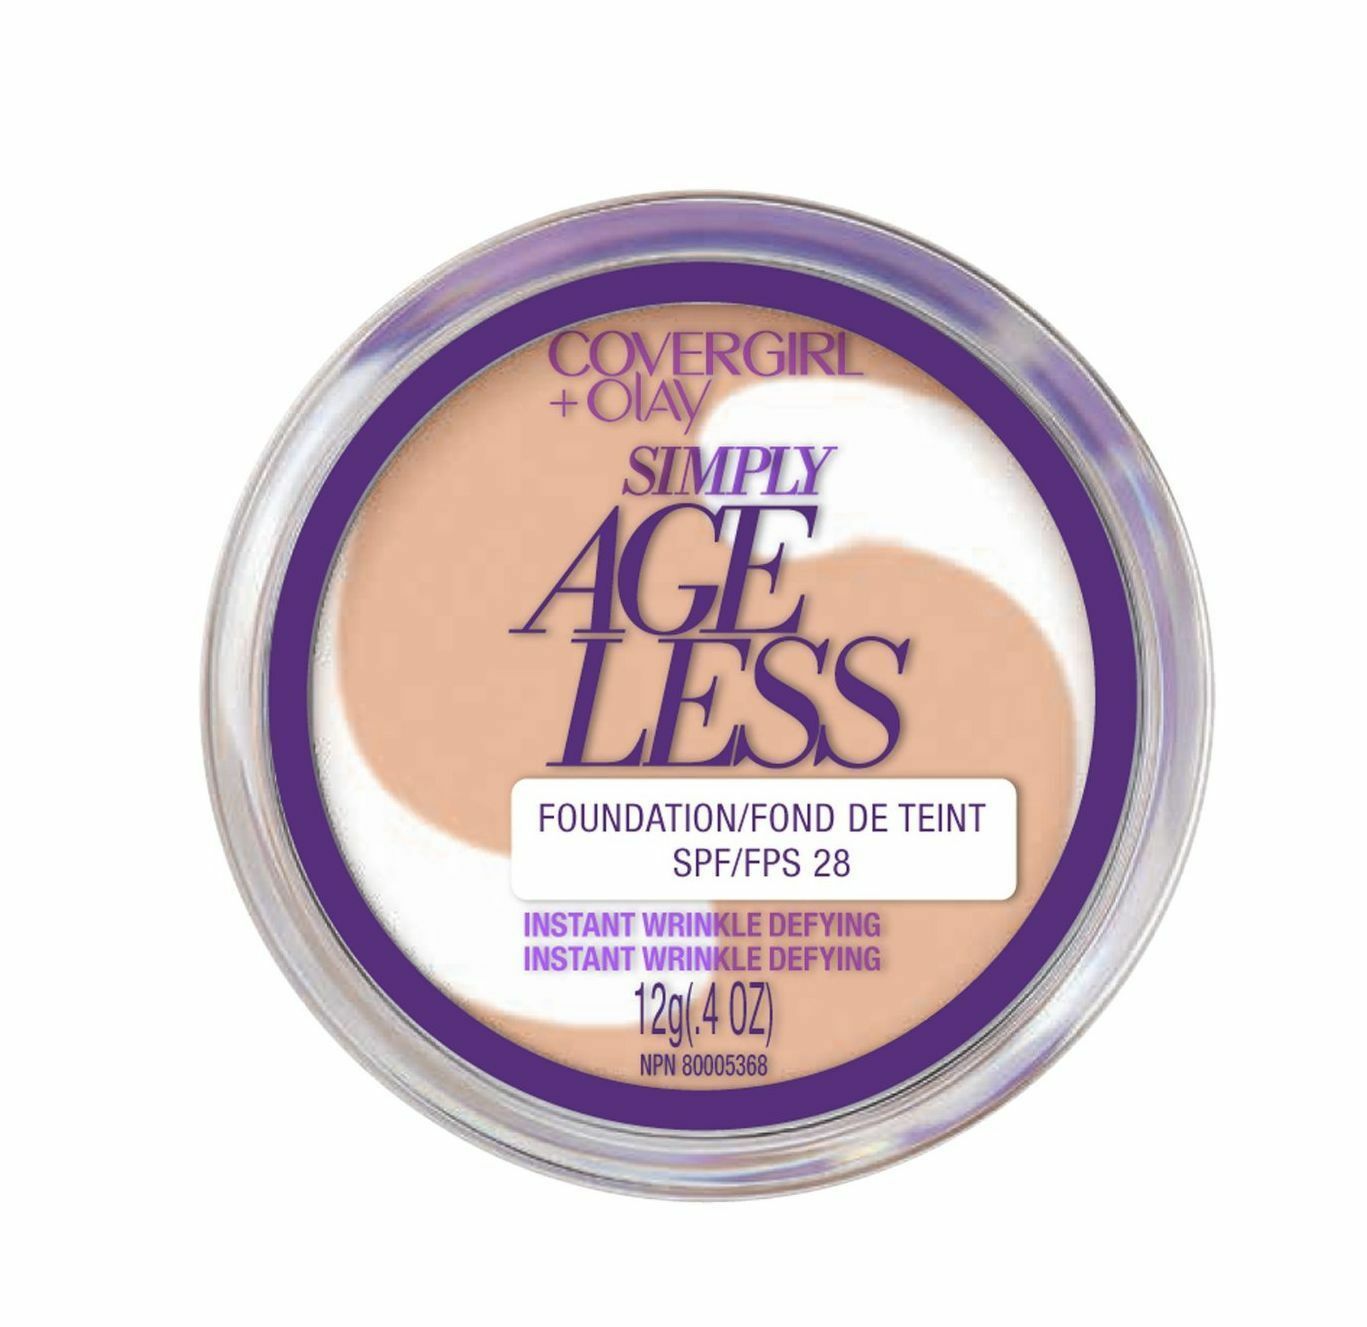 Covergirl + Olay Simply Ageless Compact Foundation ~ Choose Your Shade